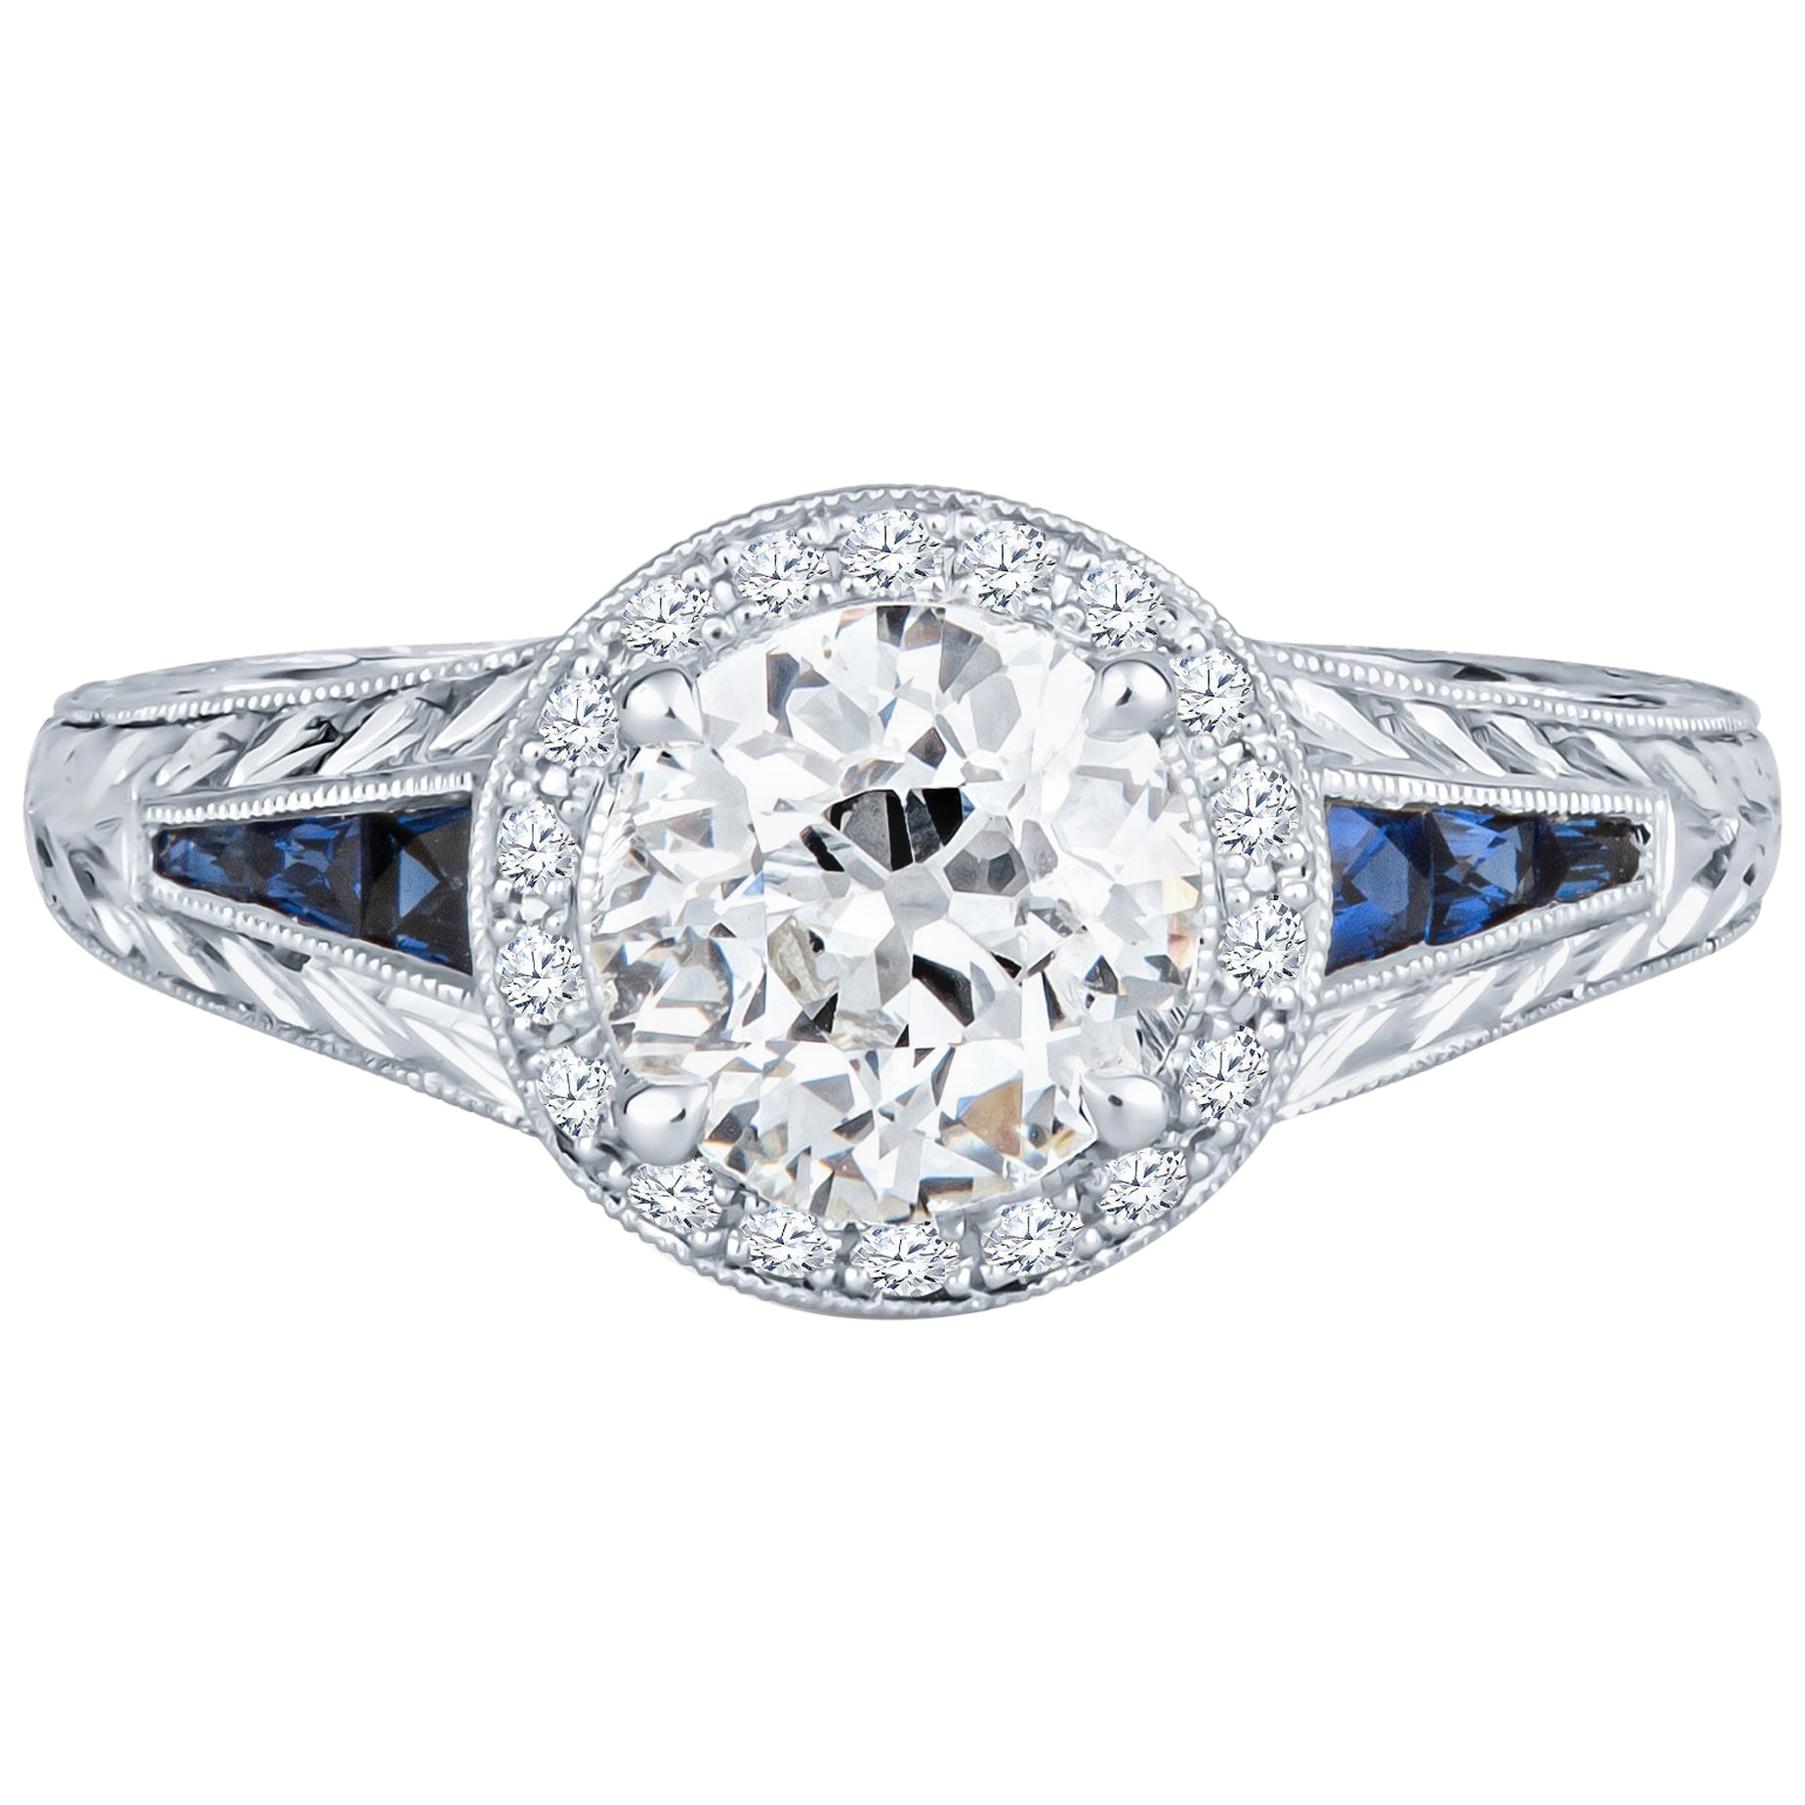 1.09 Carat Old Mine Cut Diamond with 0.22 Carat Sapphire Vintage Inspired Ring For Sale